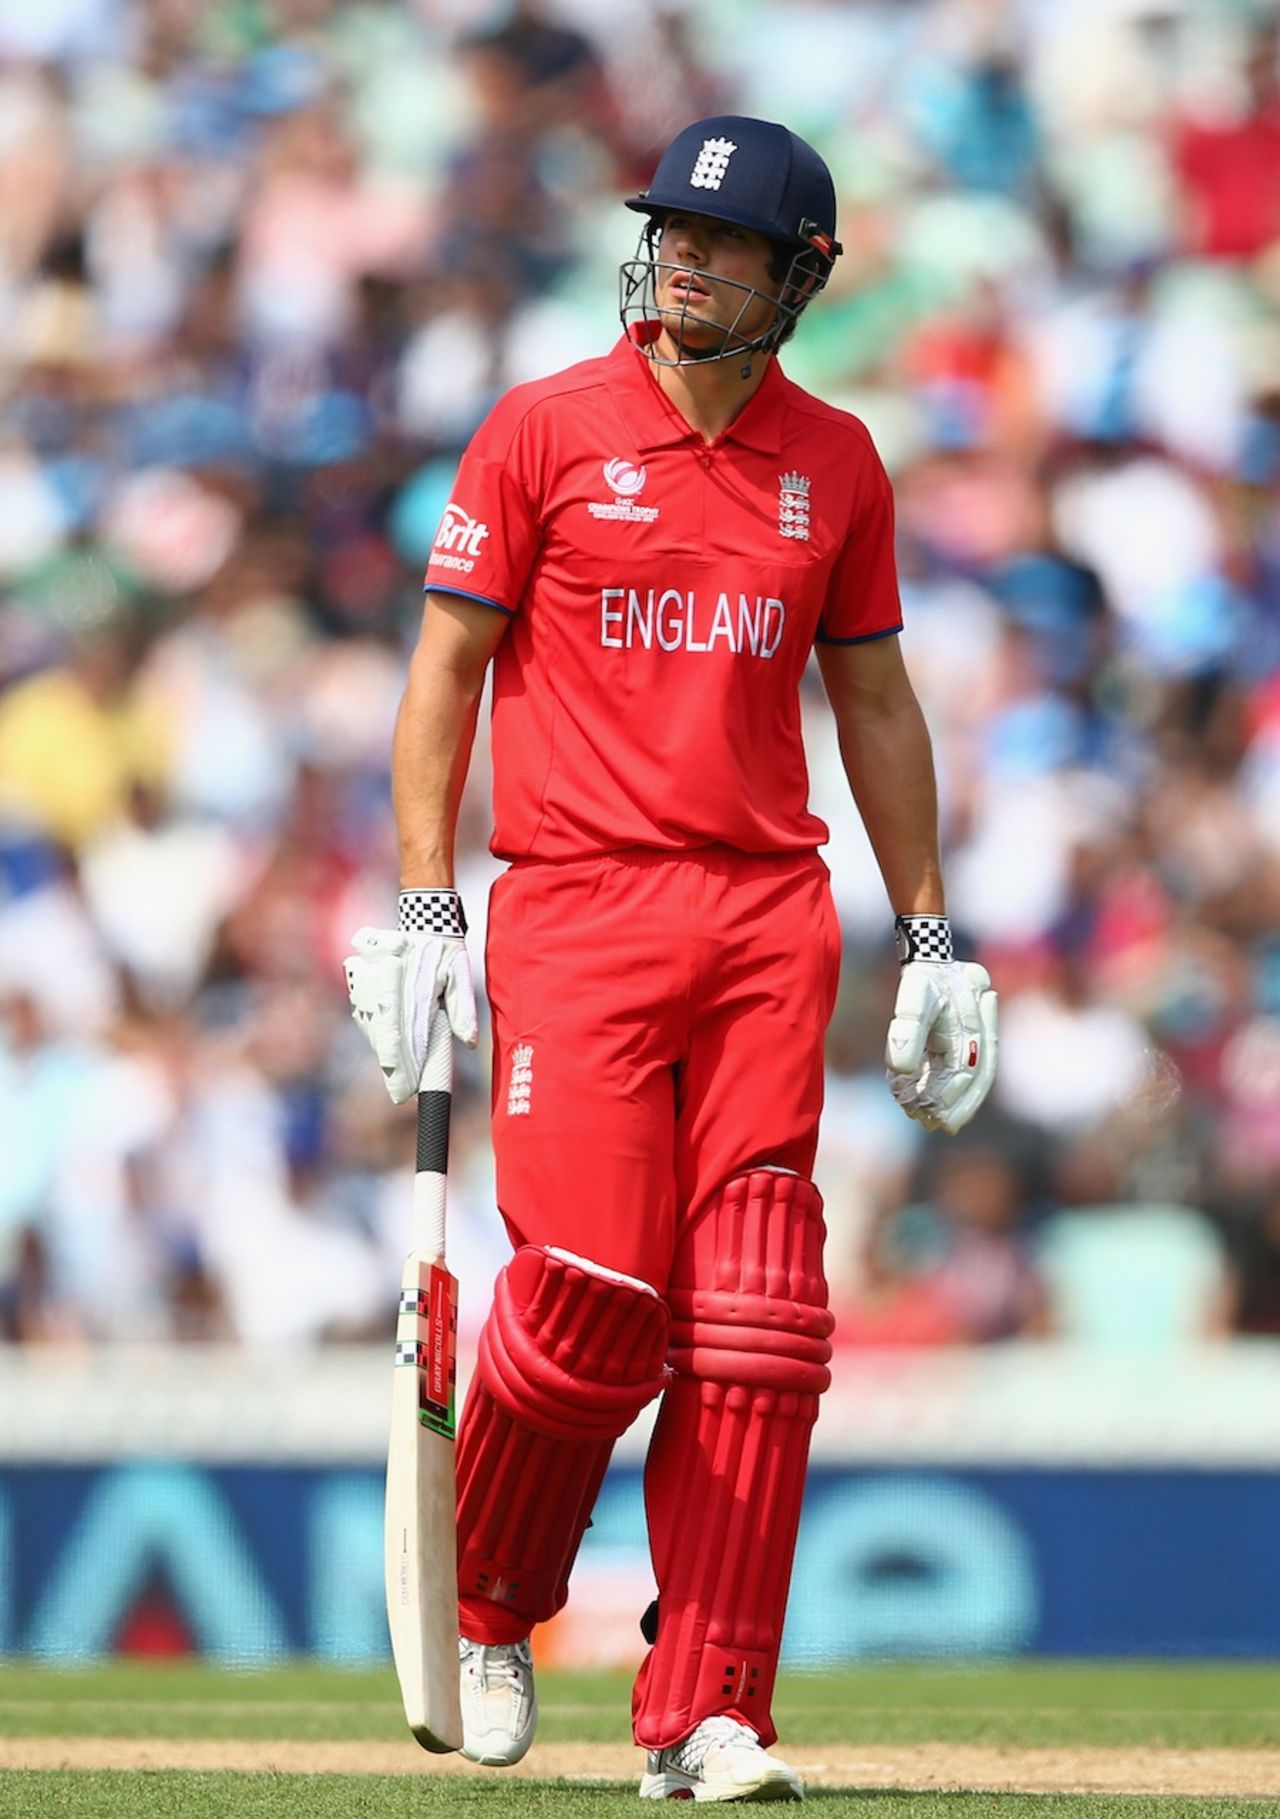 A dejected Alastair Cook walks back, England v South Africa, 1st semi-final, Champions Trophy, The Oval, June 19, 2013